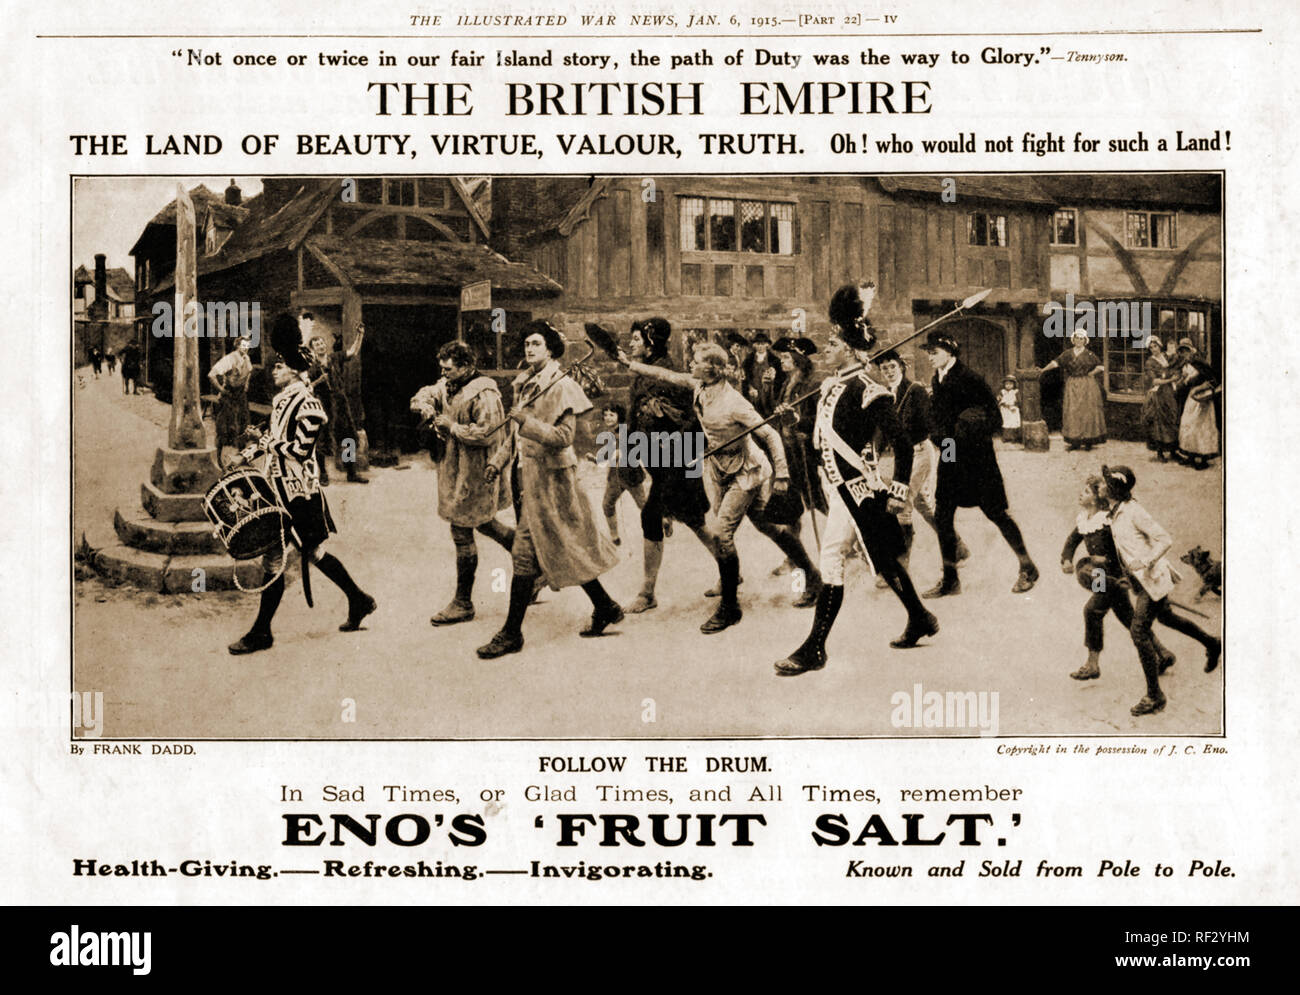 WWI - A patriotic 1915 advert for Eno's fruit salts showing ancient army volunteers being recruited in the market place. (from a painting by Frank Dad) Stock Photo